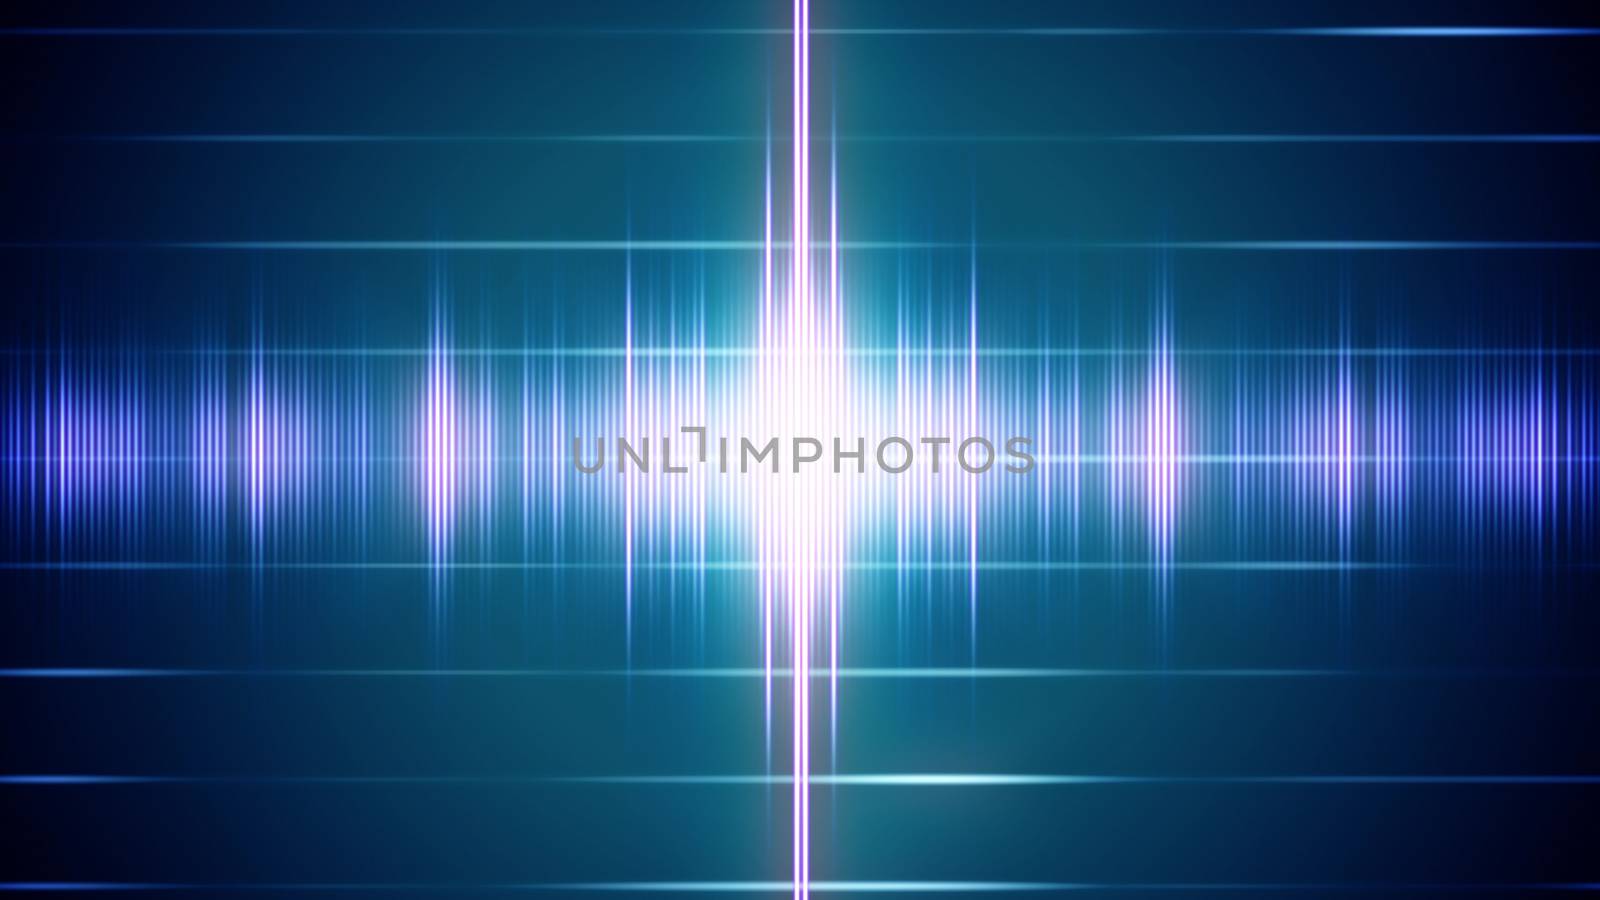 Abstract digital sound wave on the striped background with light signals. Rave music concept. 2d illustration.